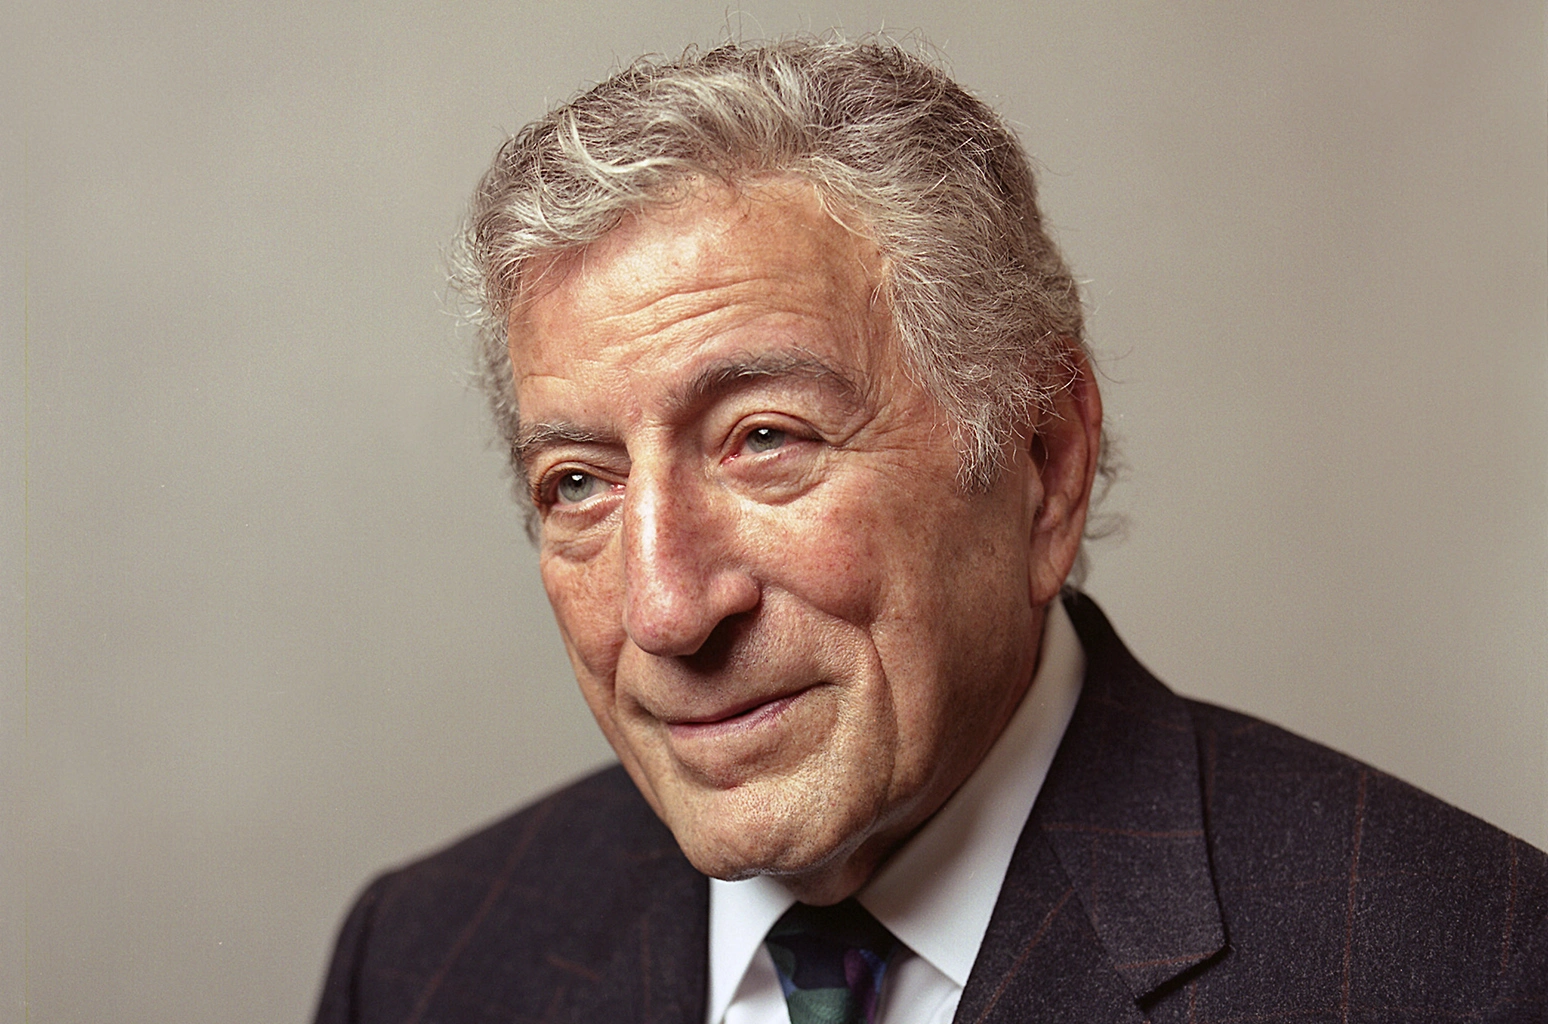 Tony Bennett, Music Legend, Legacy, Impact, Iconic Singer, Songs, Career, Jazz Musician, Collaborations, Alzheimer's Diagnosis, Music Industry, 95th Birthday, Civil Rights Advocate, Tribute, Timeless Melodies, Inspirational Artist, Artistry, Musician's Legacy, Remembering, Contributions.